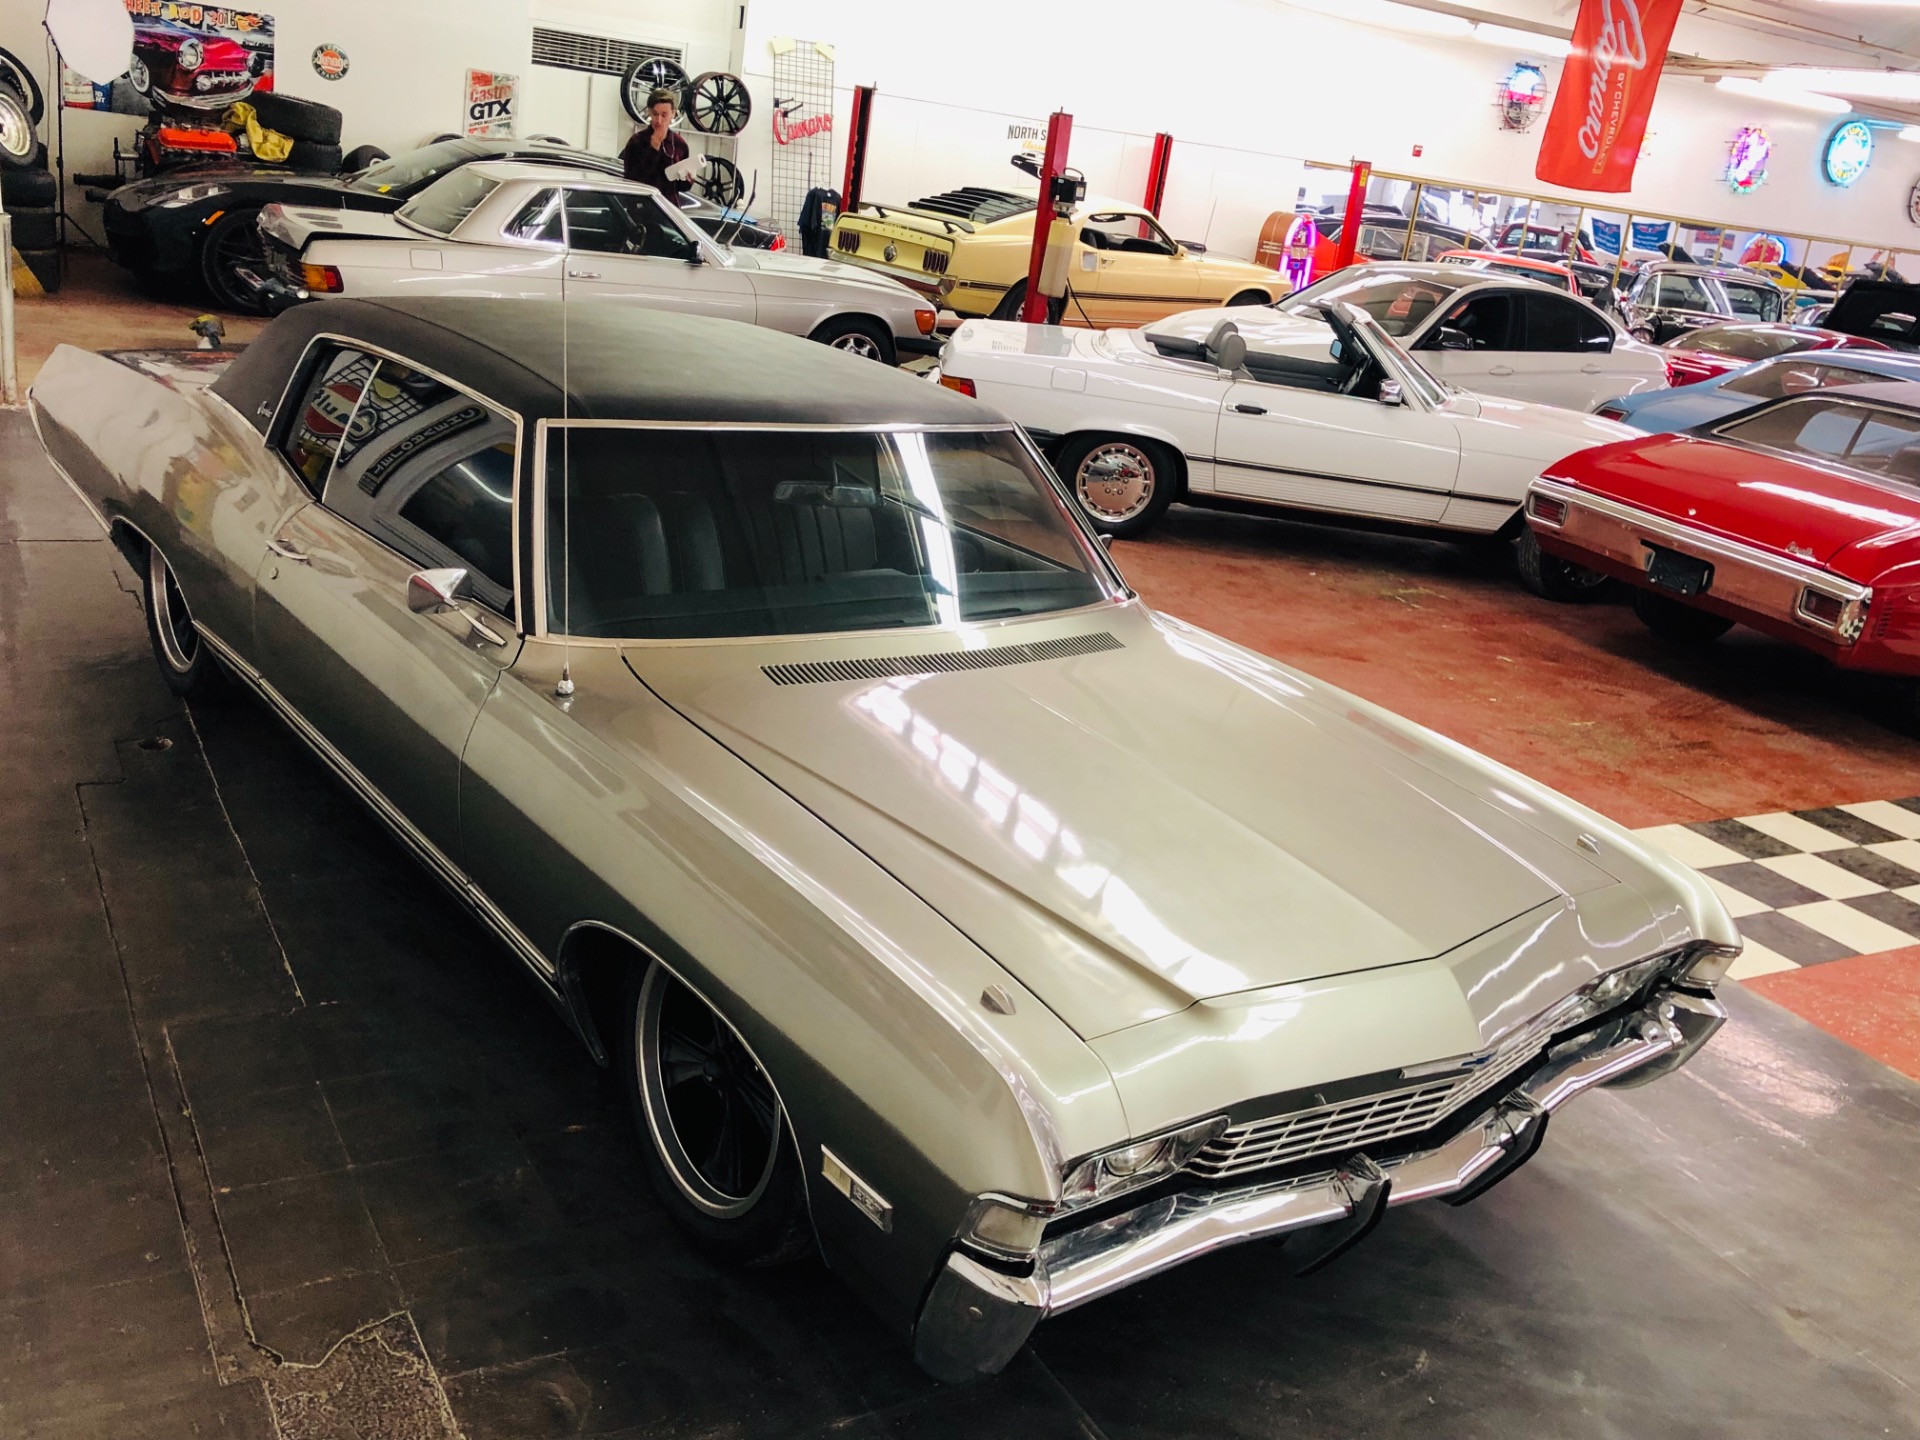 Used 1968 Chevrolet Caprice -NEW LOW PRICE -COOL CUSTOM CAPRICE- AIR RIDE- NEW PAINT- SEE VIDEO | Mundelein, IL